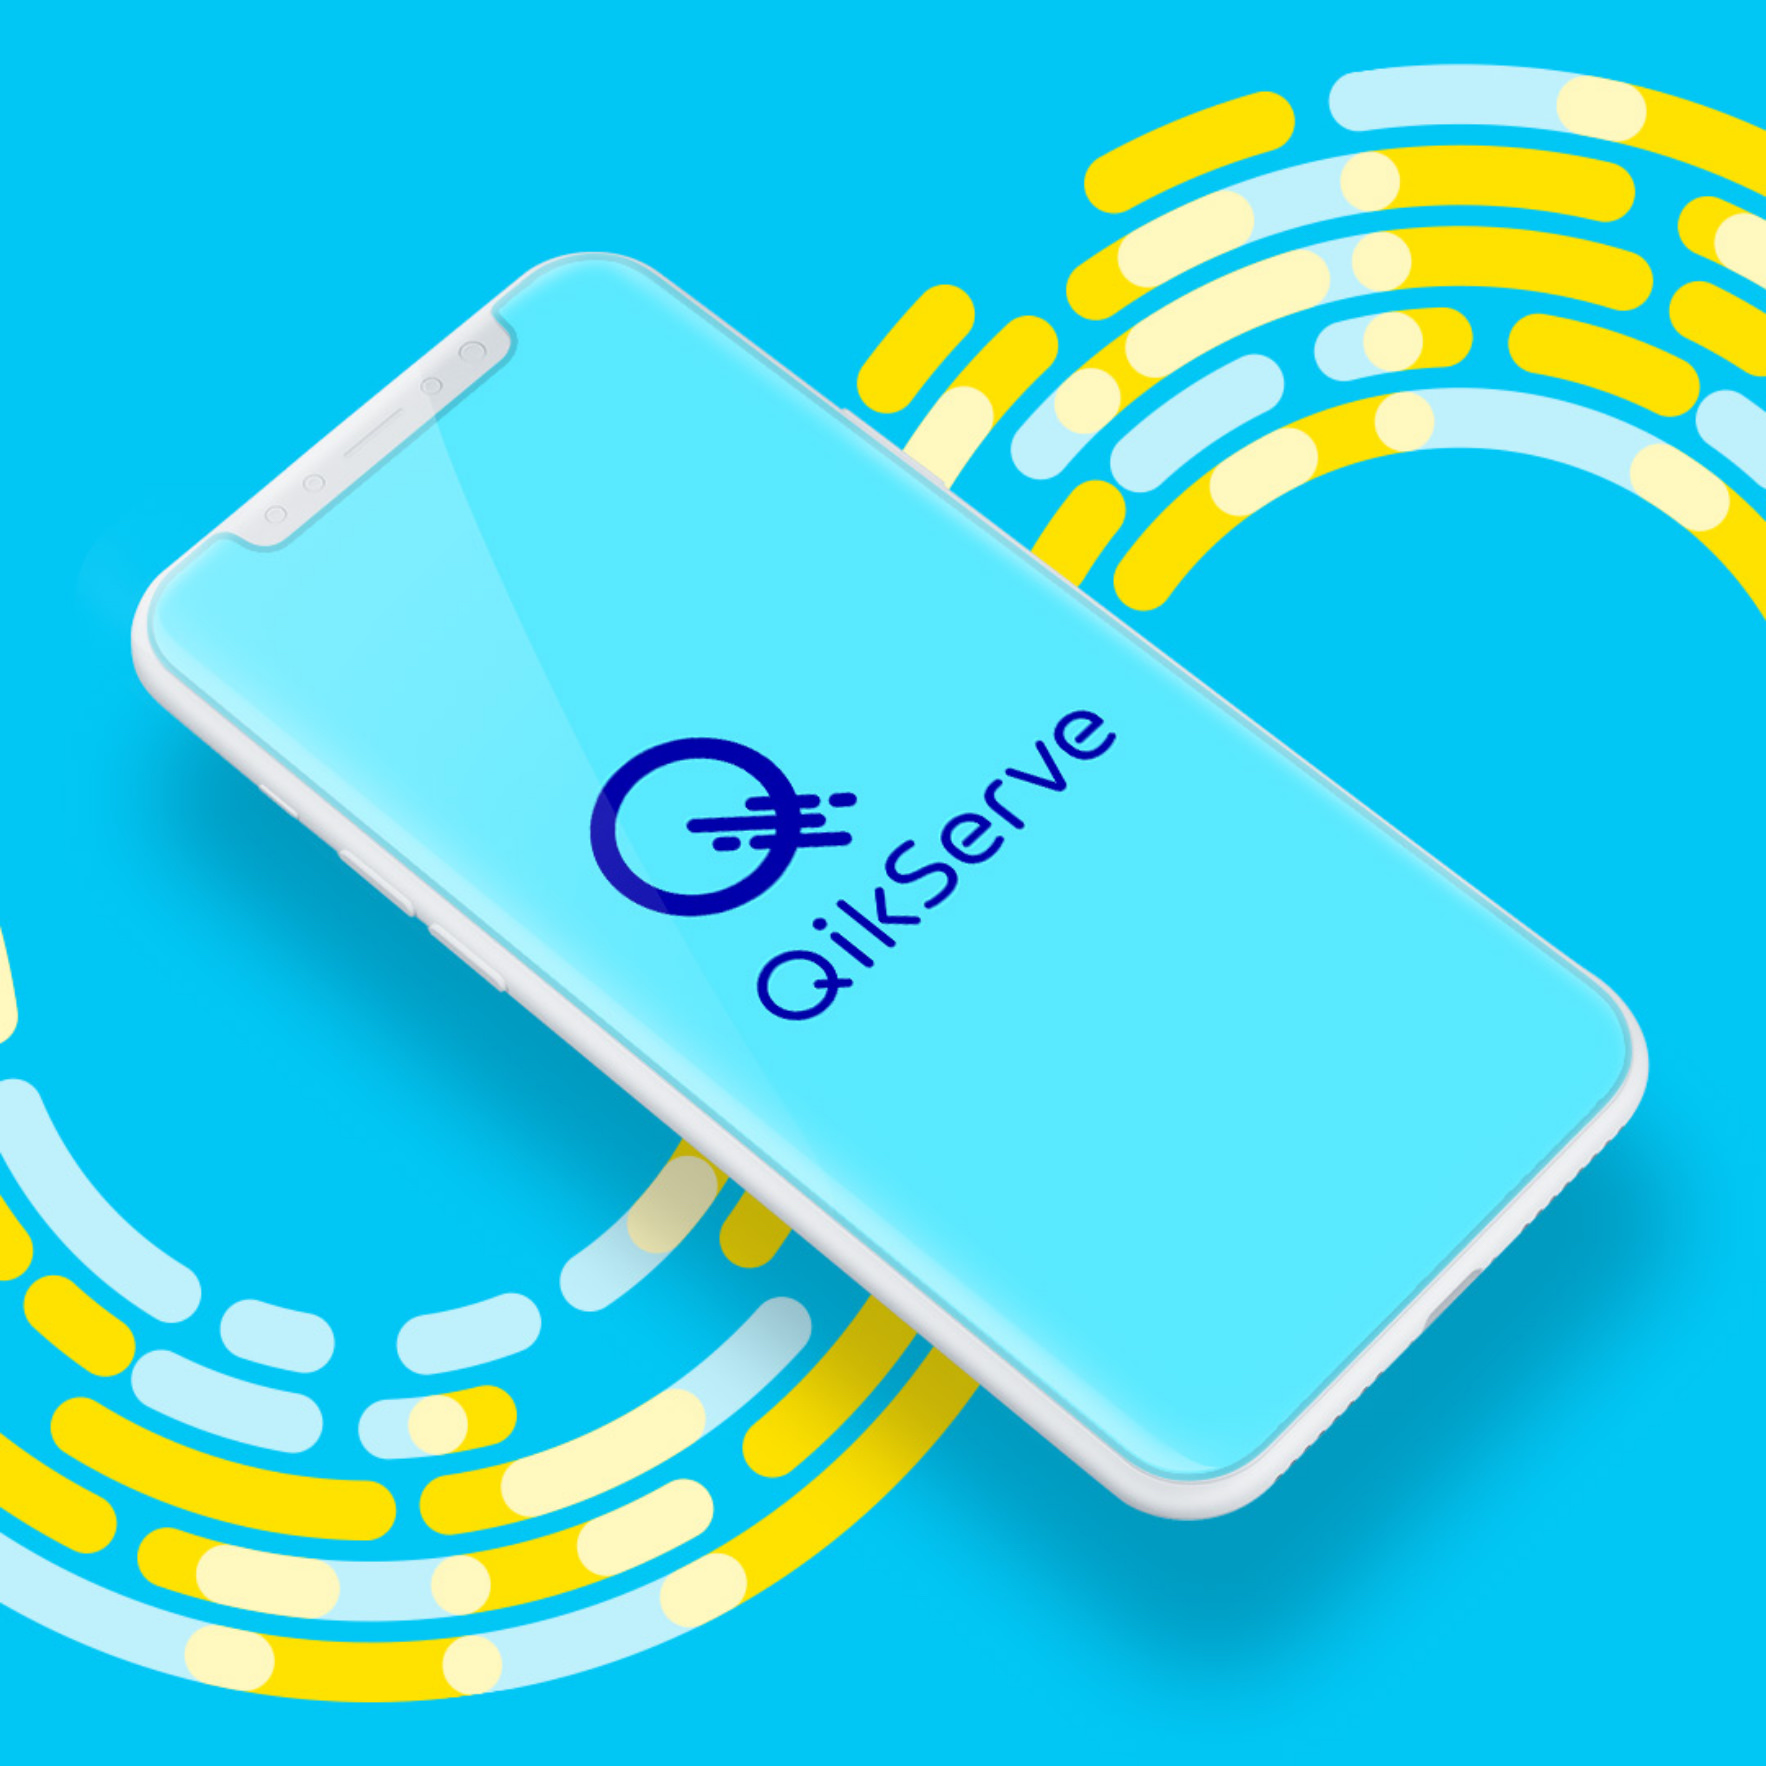 The QikServe identity designed by Monumentum shown on an iPhone